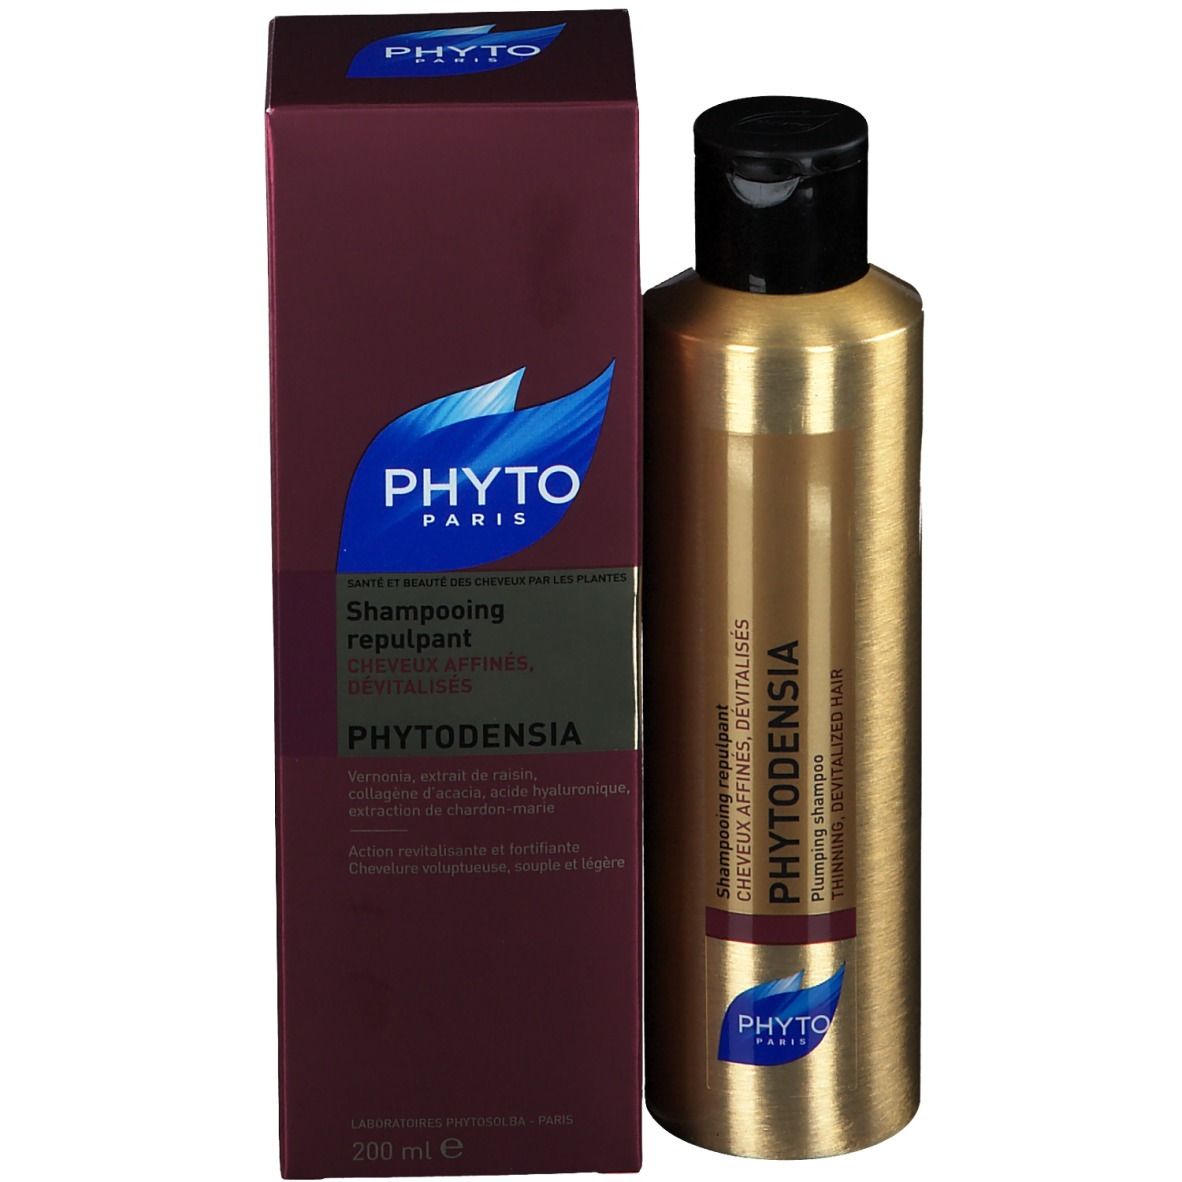 PHYTO PHYTODENSIA Shampooing Repulpant